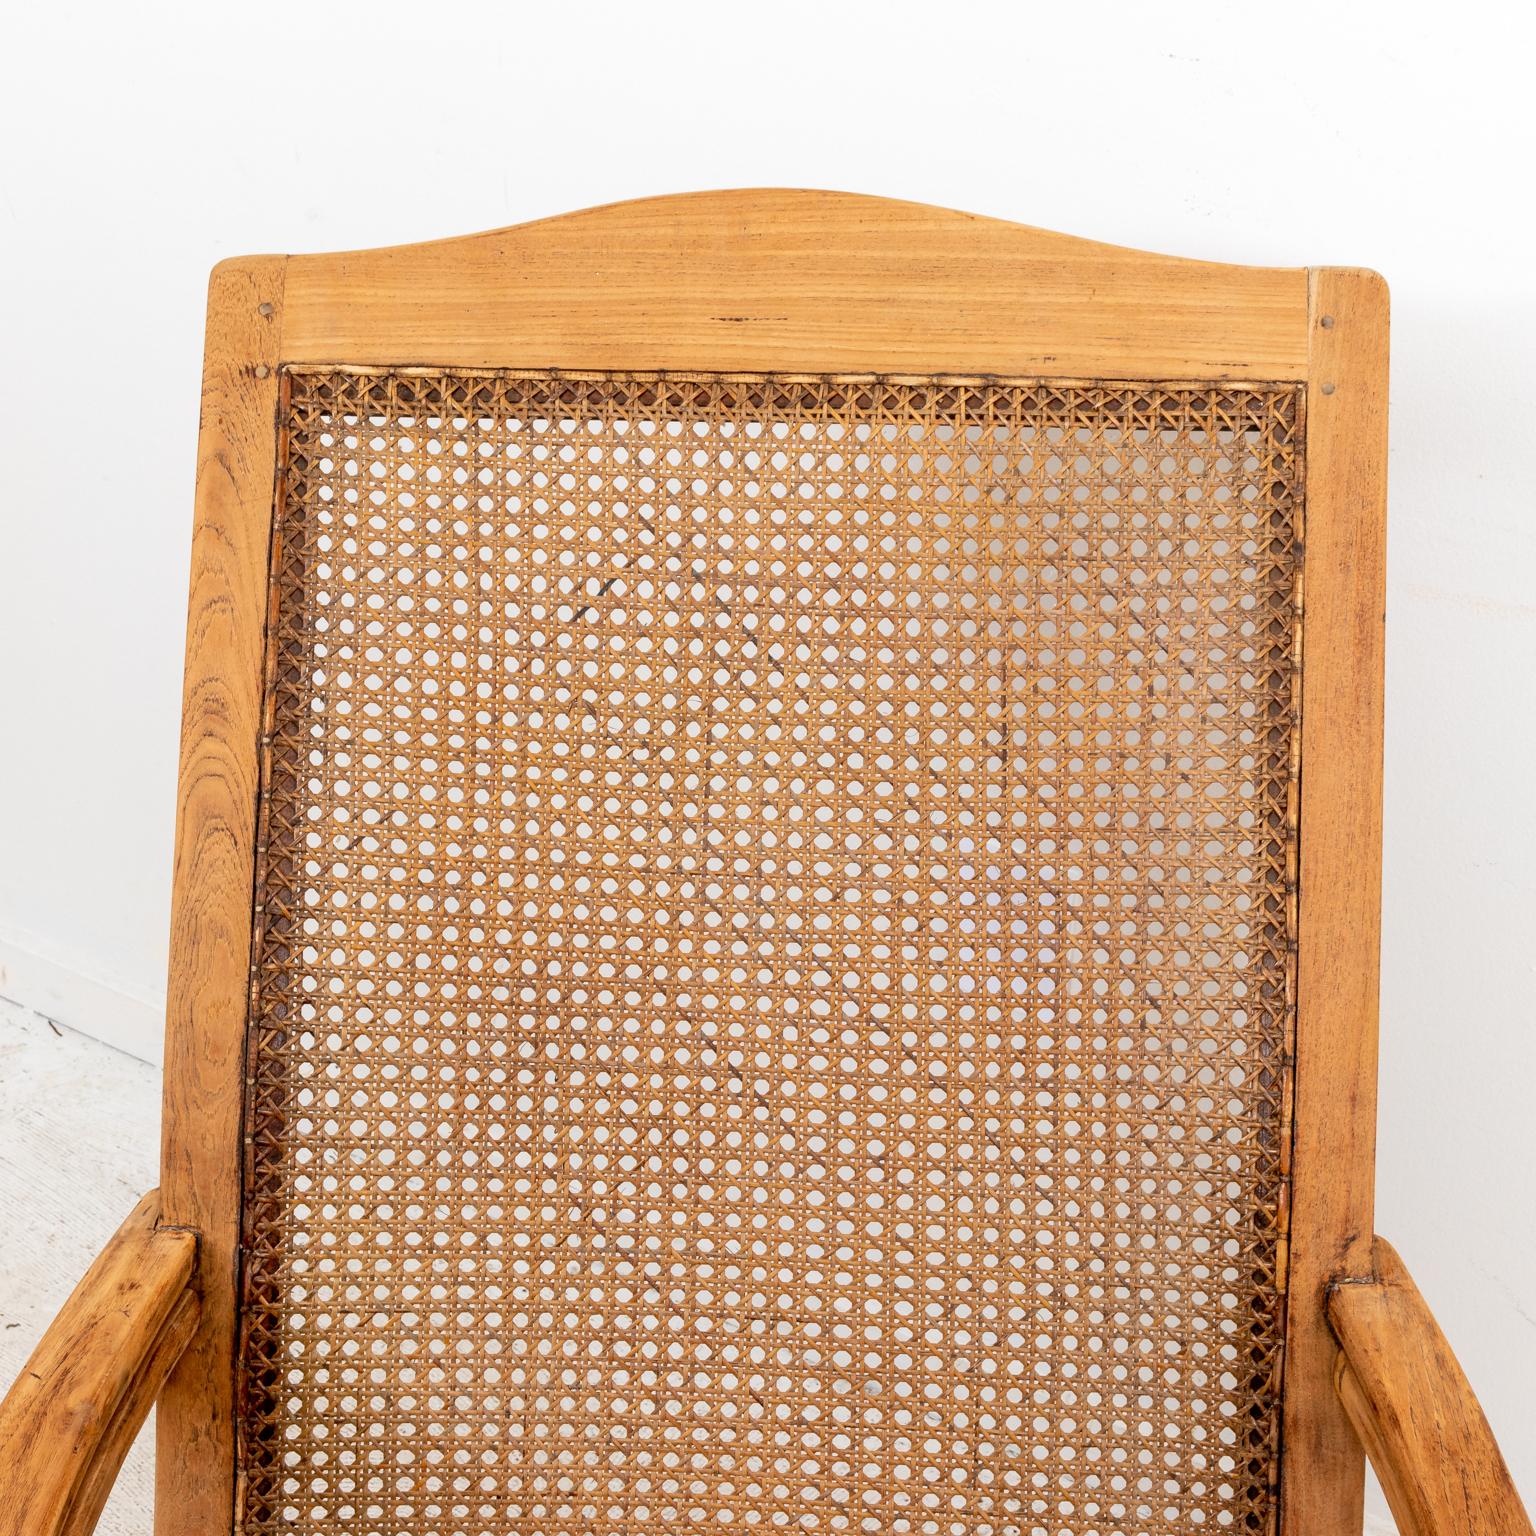 Cane woven plantation armchair with arrow turned legs. The chairs also feature octagonal woven cane. Please note of wear consistent with age including wood loss, chips, and heavy patina loss.